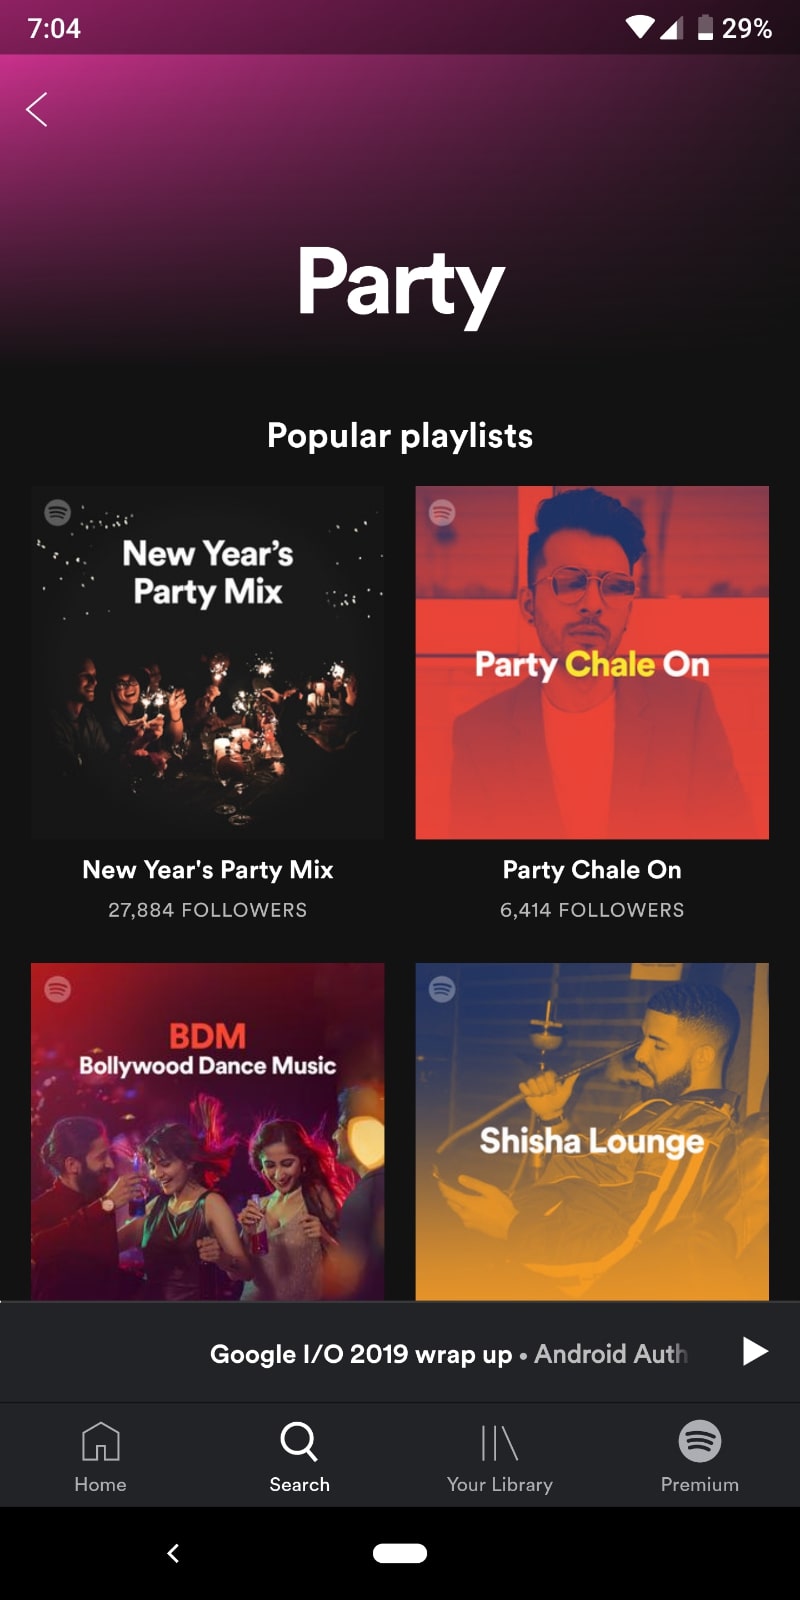 Spotify india plans